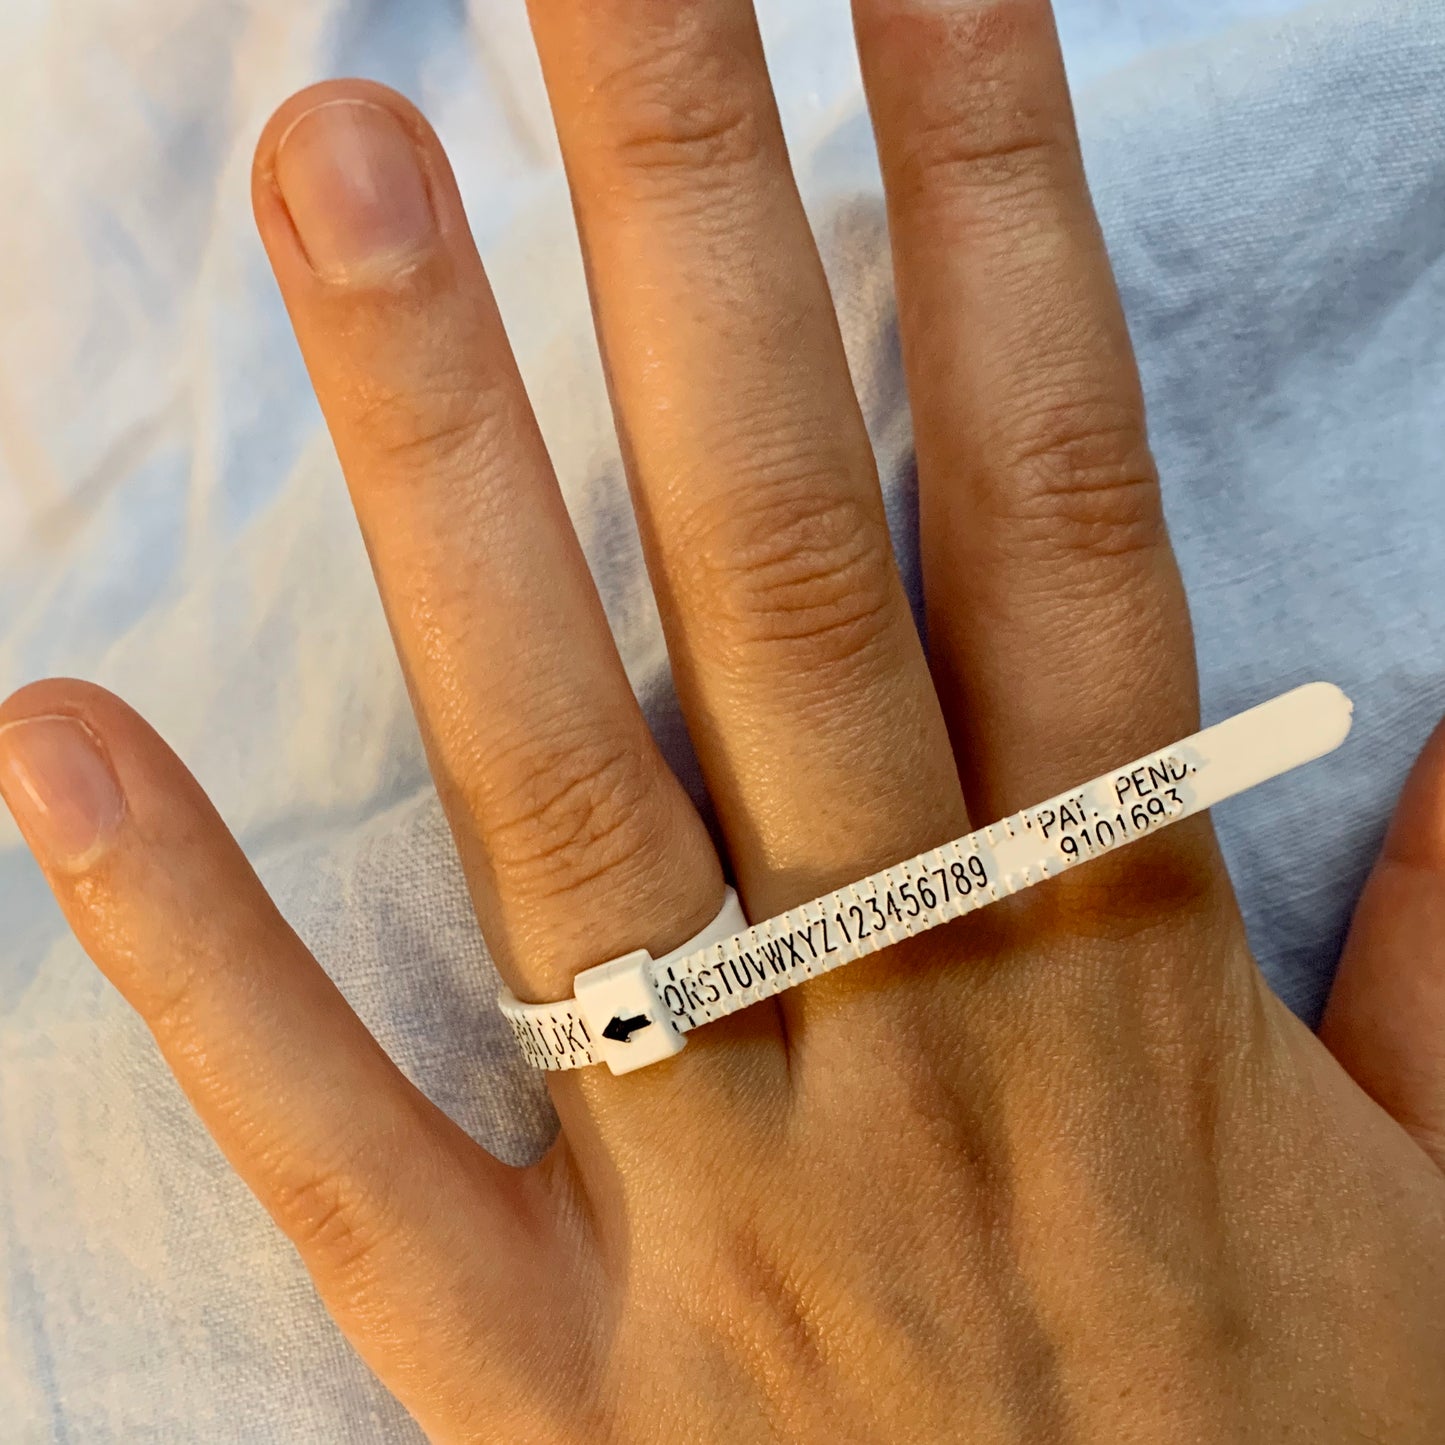 An adjustable ring sizer pictured on a finger.